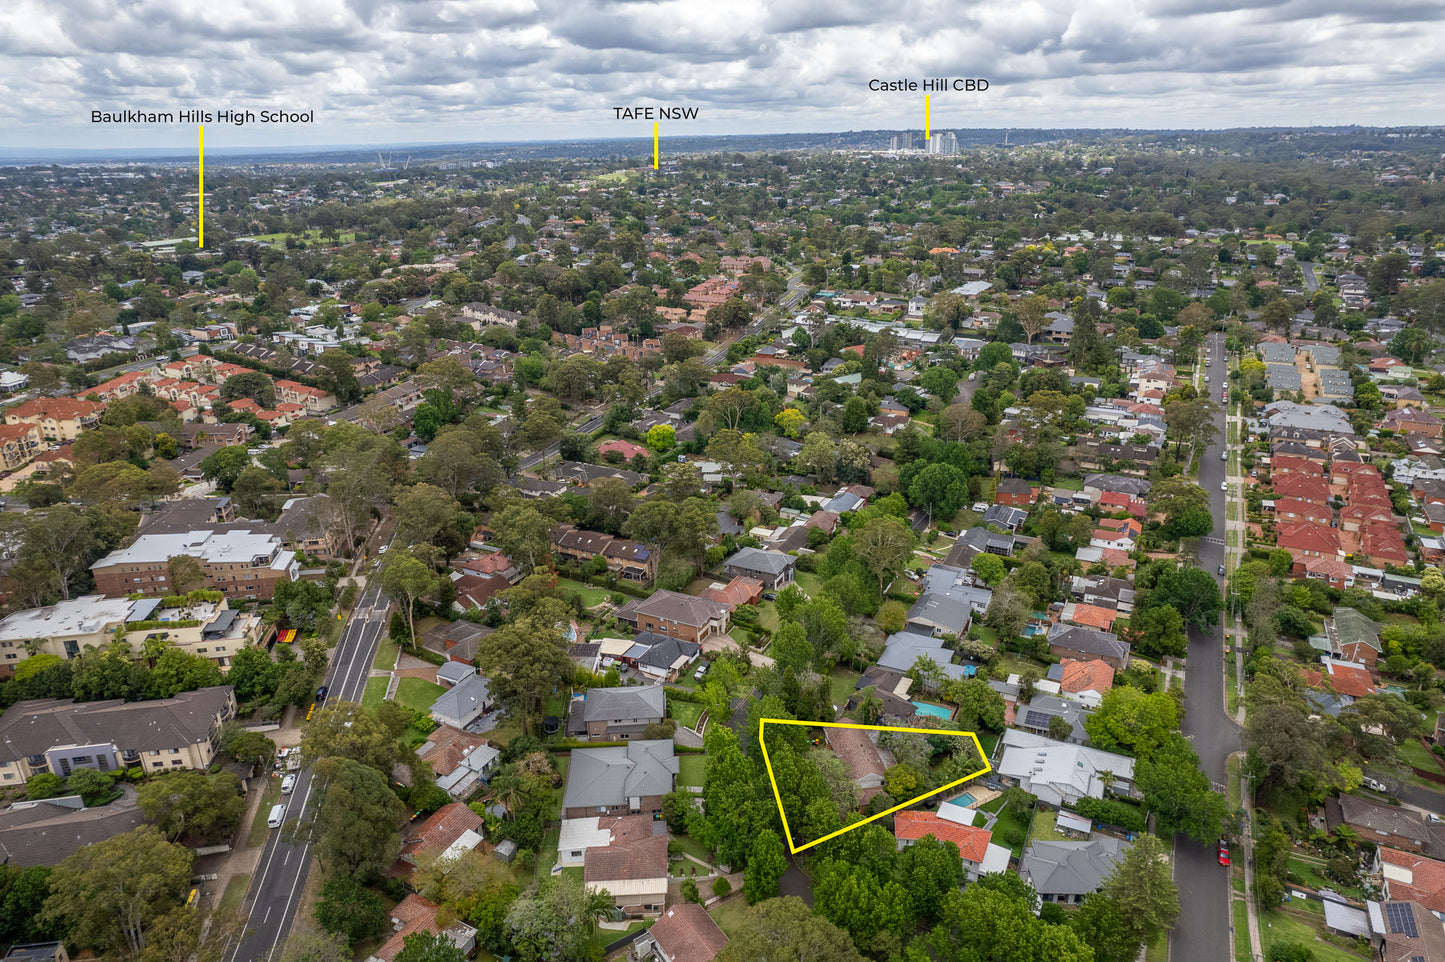 5 Carole Avenue, Baulkham Hills NSW 2153 - ANOTHER SOLD BY THE TEAM AT $1,675,000!